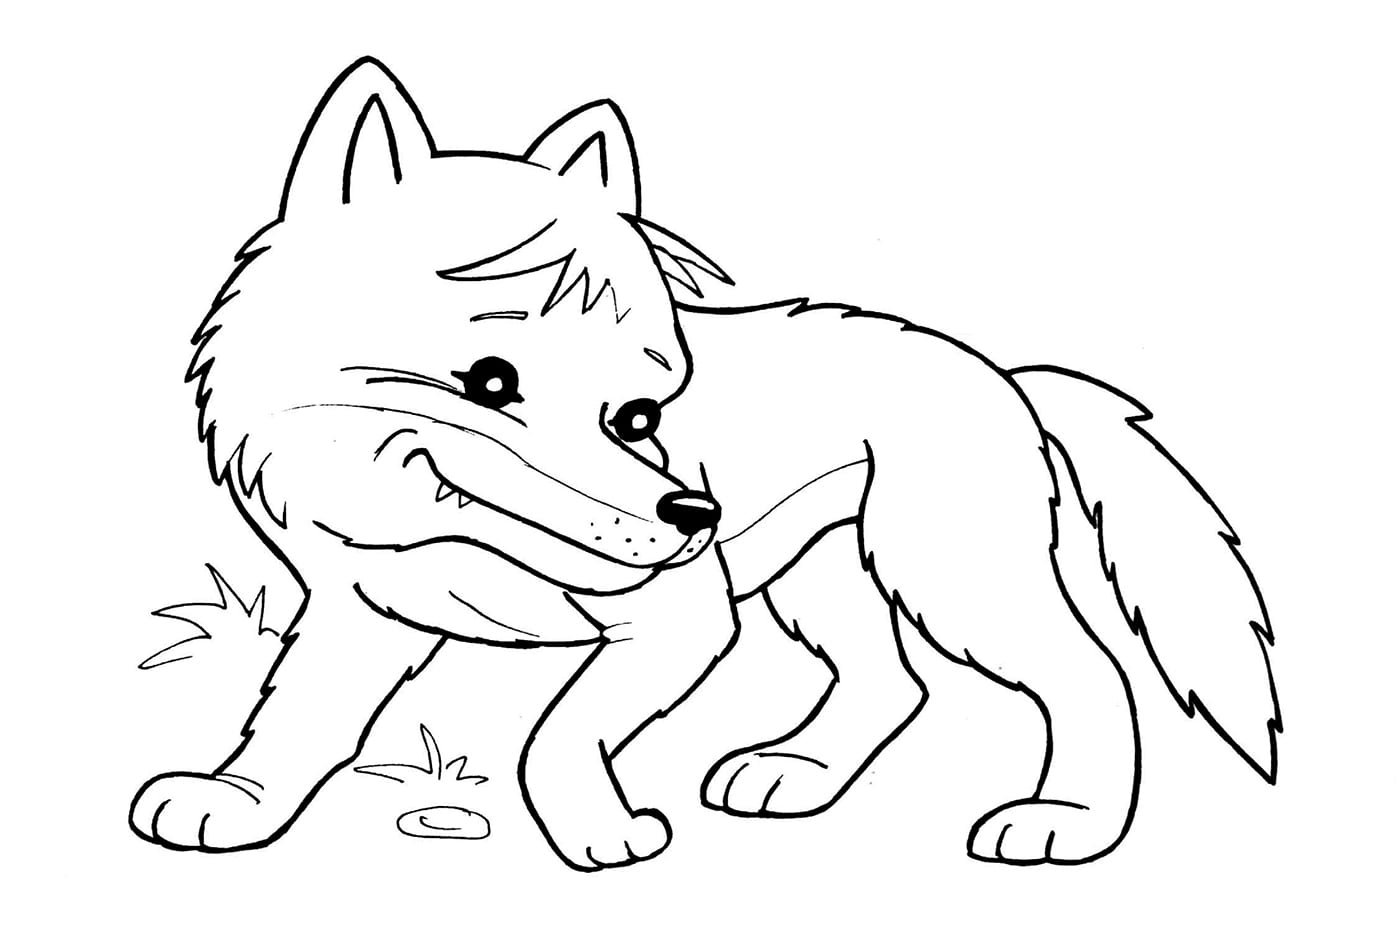 Creative fox coloring book for kids